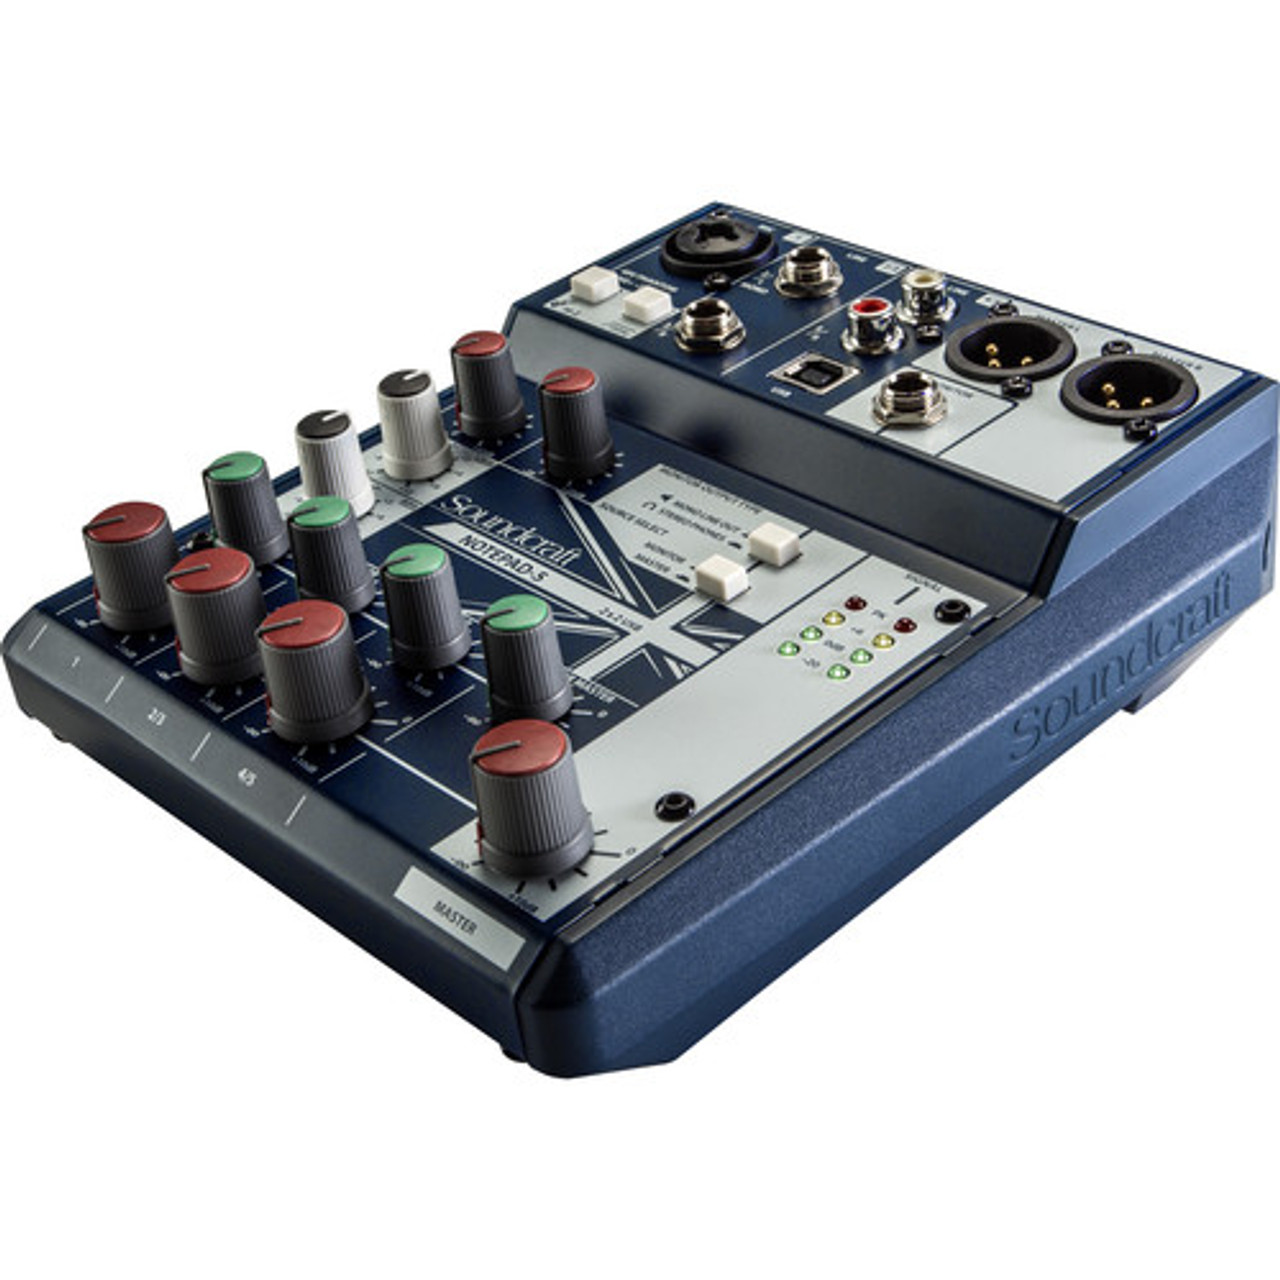 Soundcraft Notepad-5 Small-Format Analog Mixing Console with USB I/O (SCR-5085980US-01)